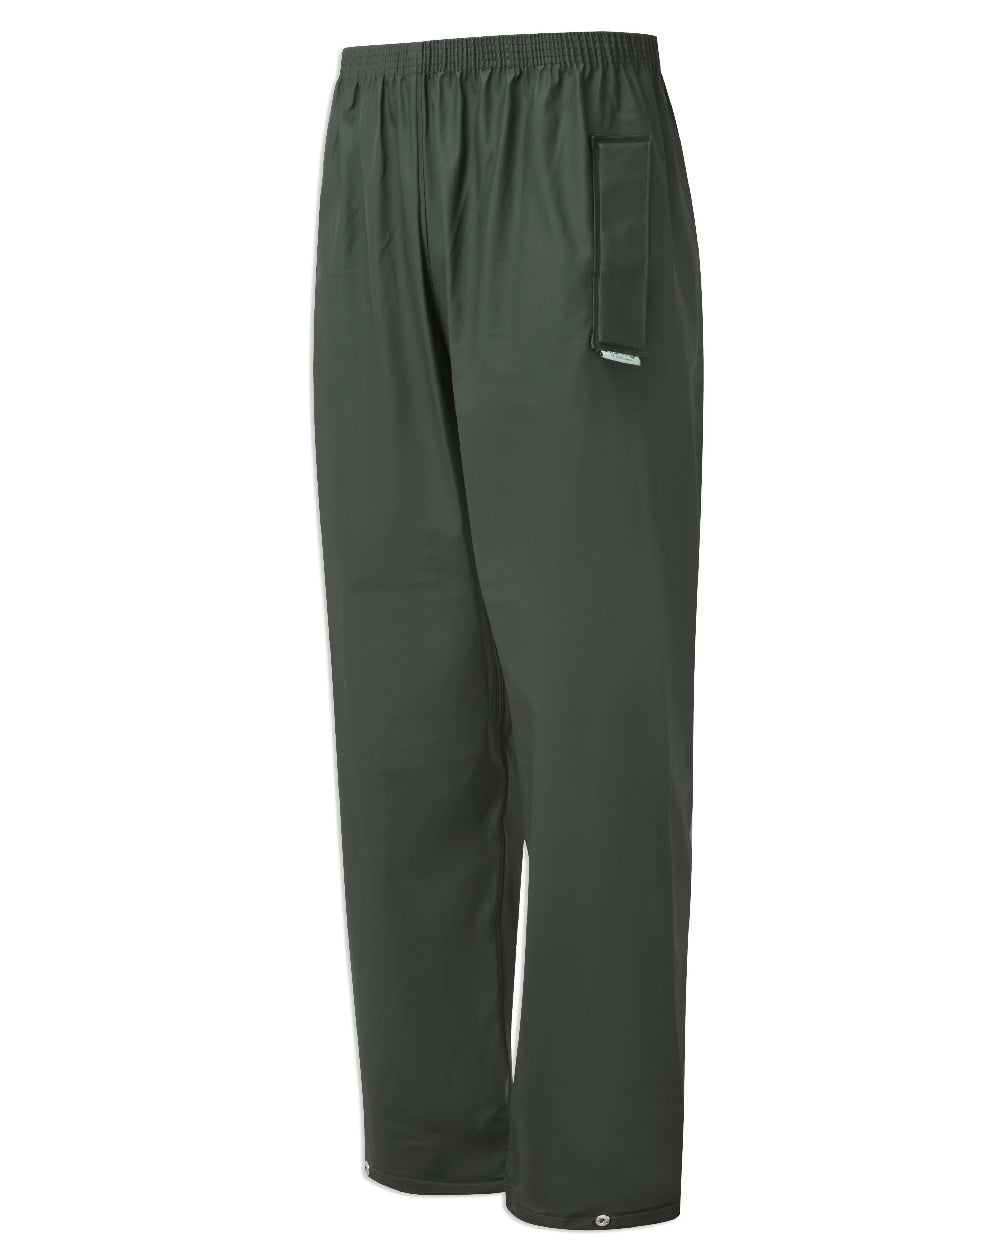 Seal Flex Waterproof Over Trousers  Olive  Outback Outfitters